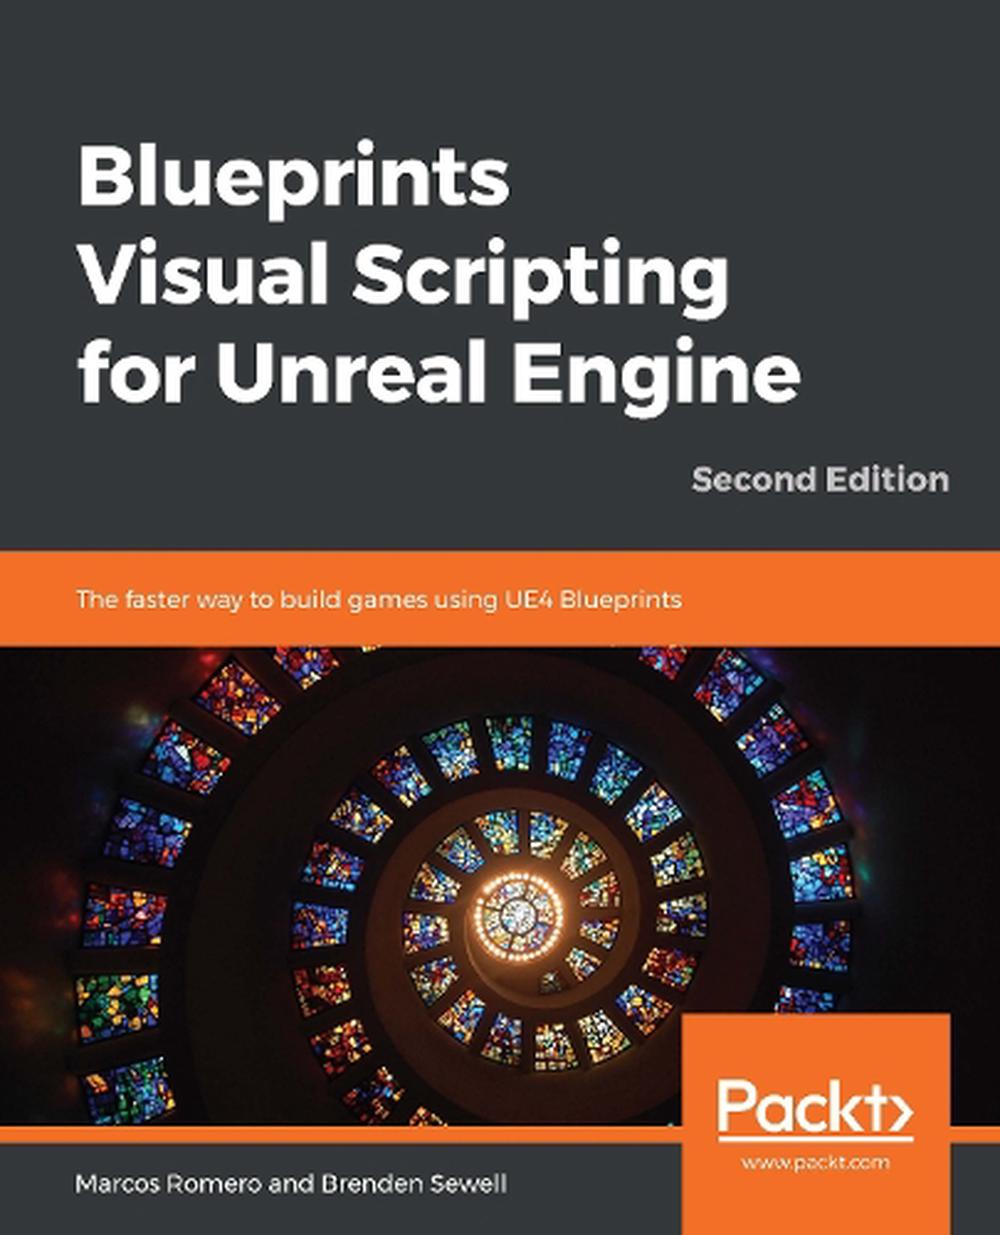 Blueprints Visual Scripting For Unreal Engine By Marcos Romero